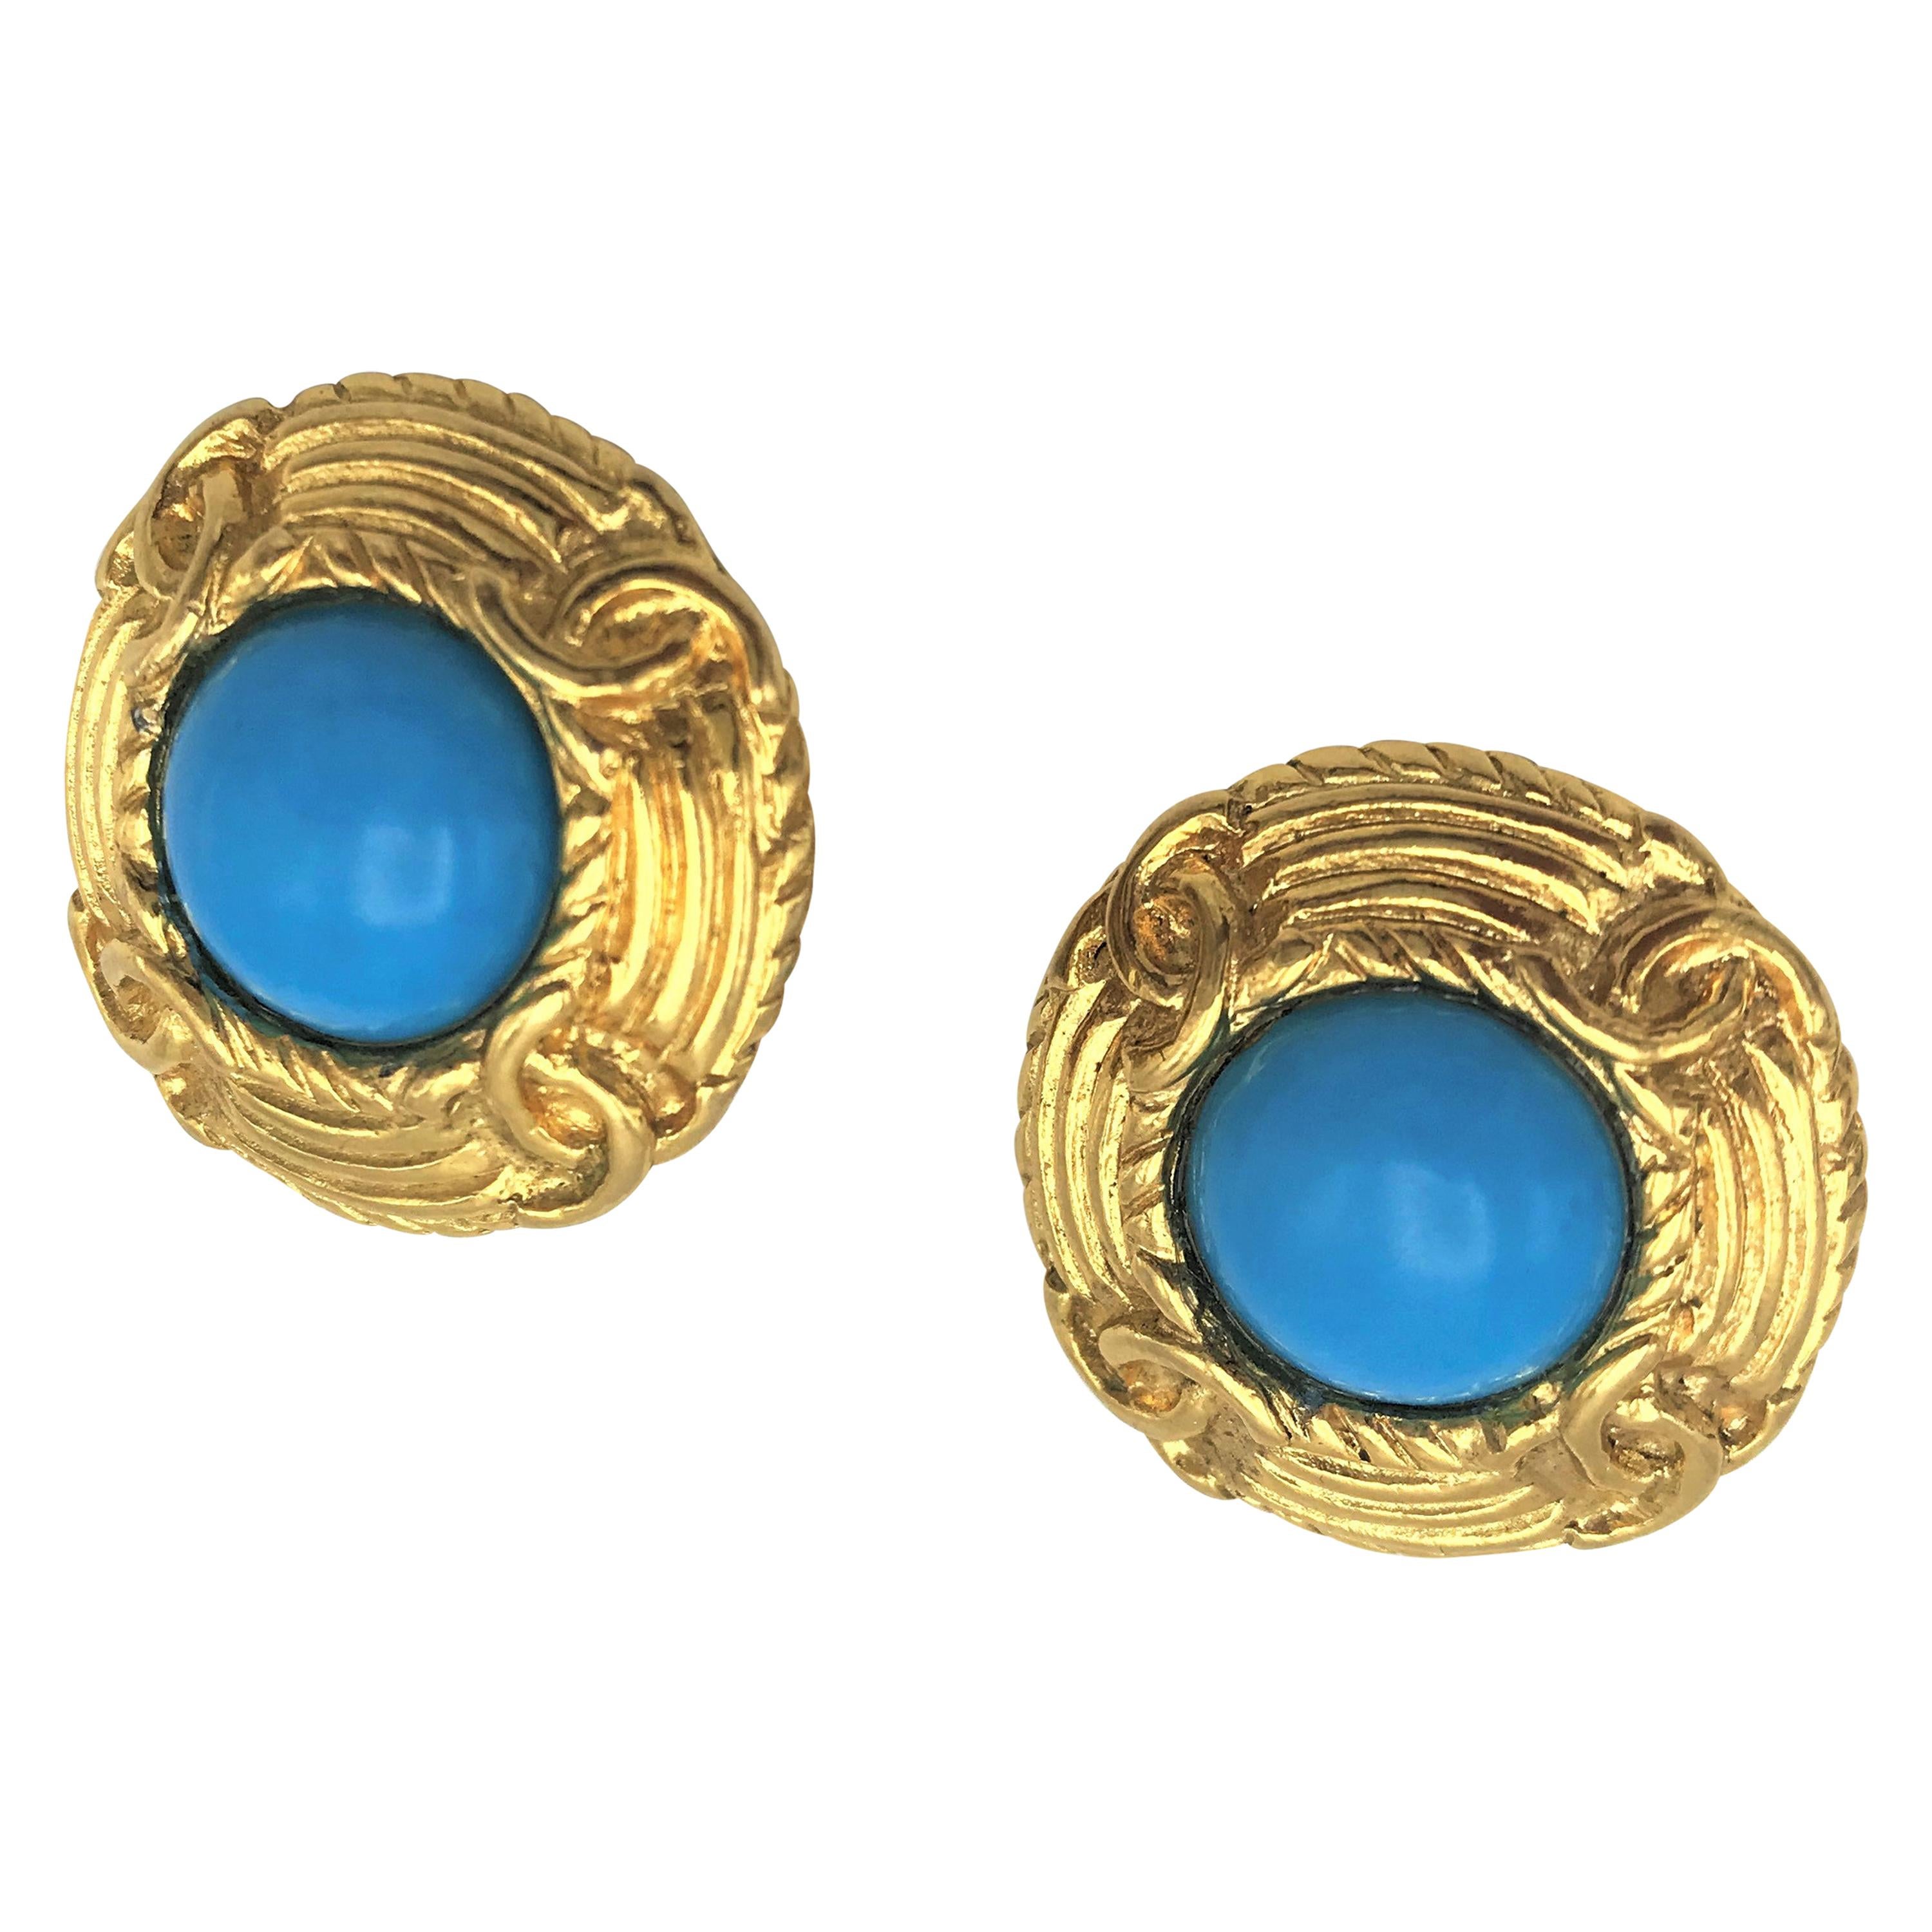  Vintage Chanel clip-on earring Paris  70/80s  gold plate,  turquoise Cabochon For Sale